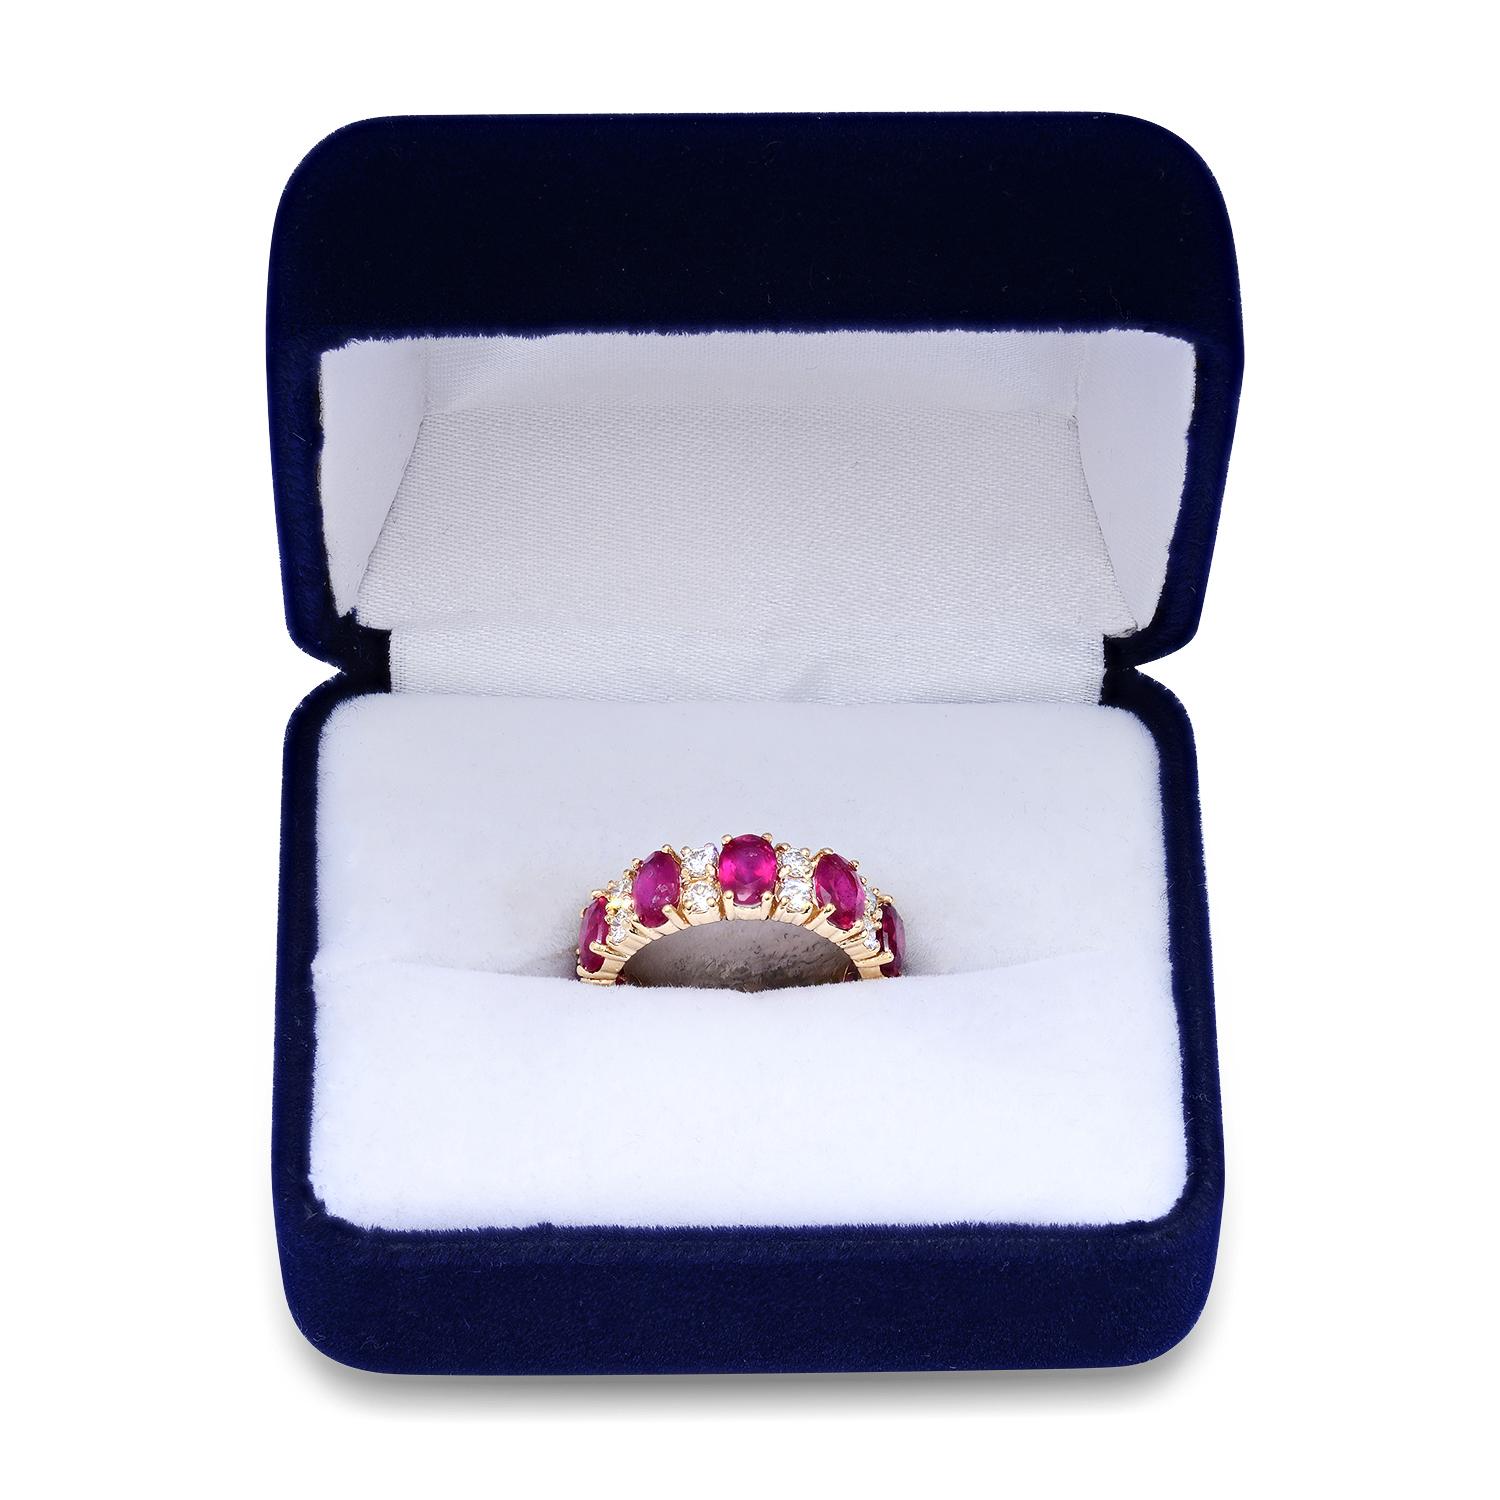 14K Yellow Gold Setting with 6.5ct Ruby and 1.22ct Diamond Band